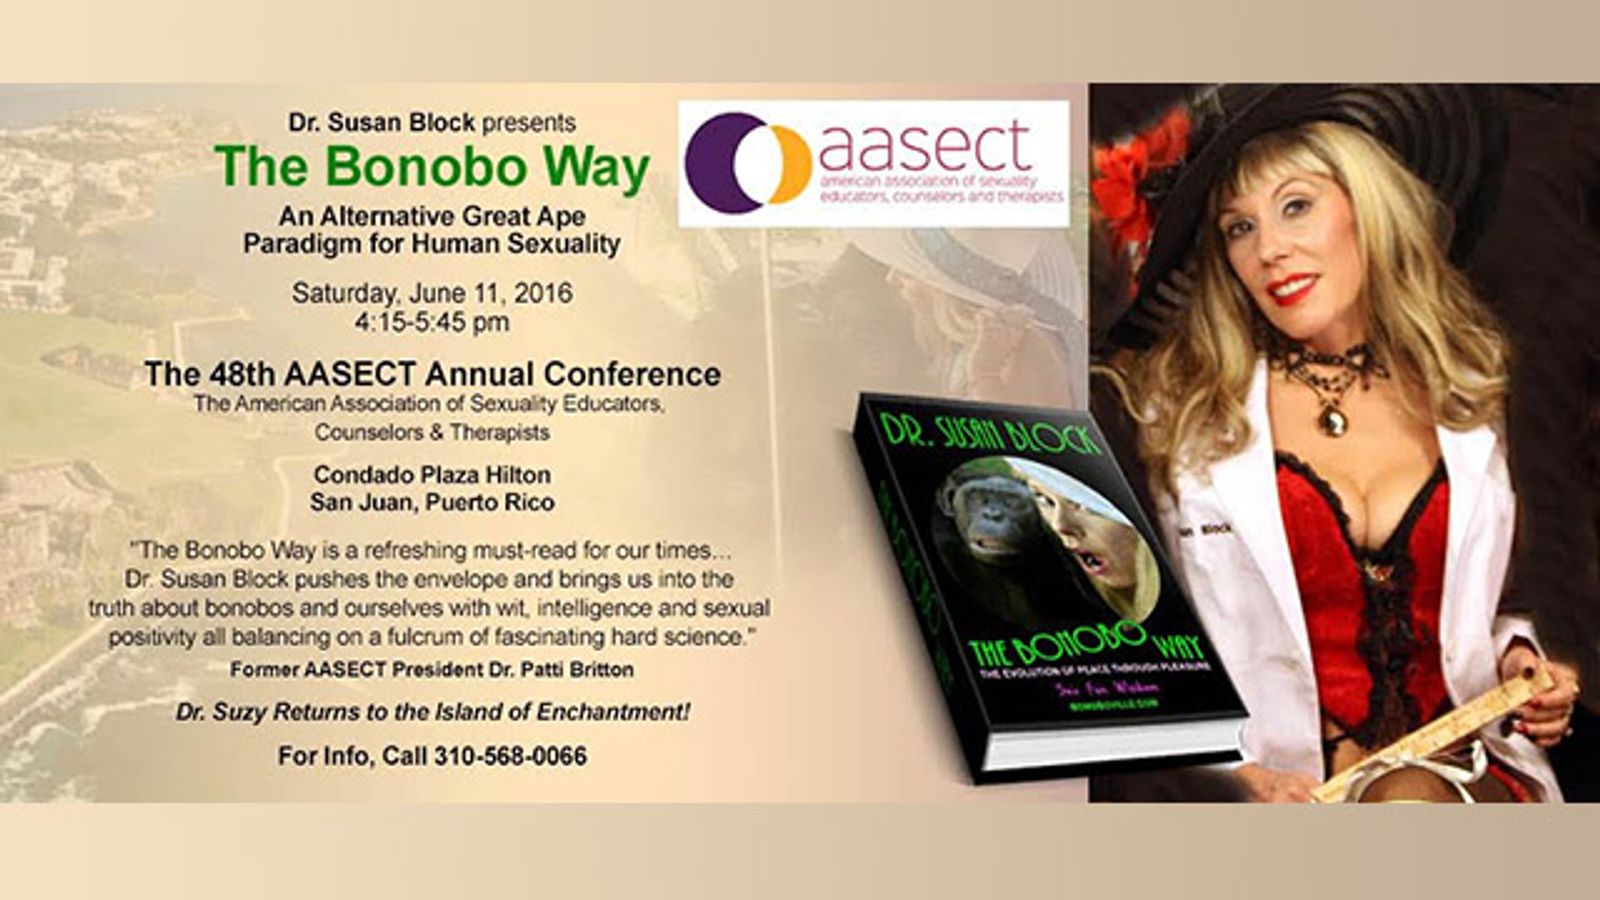 Dr. Susan Block To Present The Bonobo Way At AASECT 2016